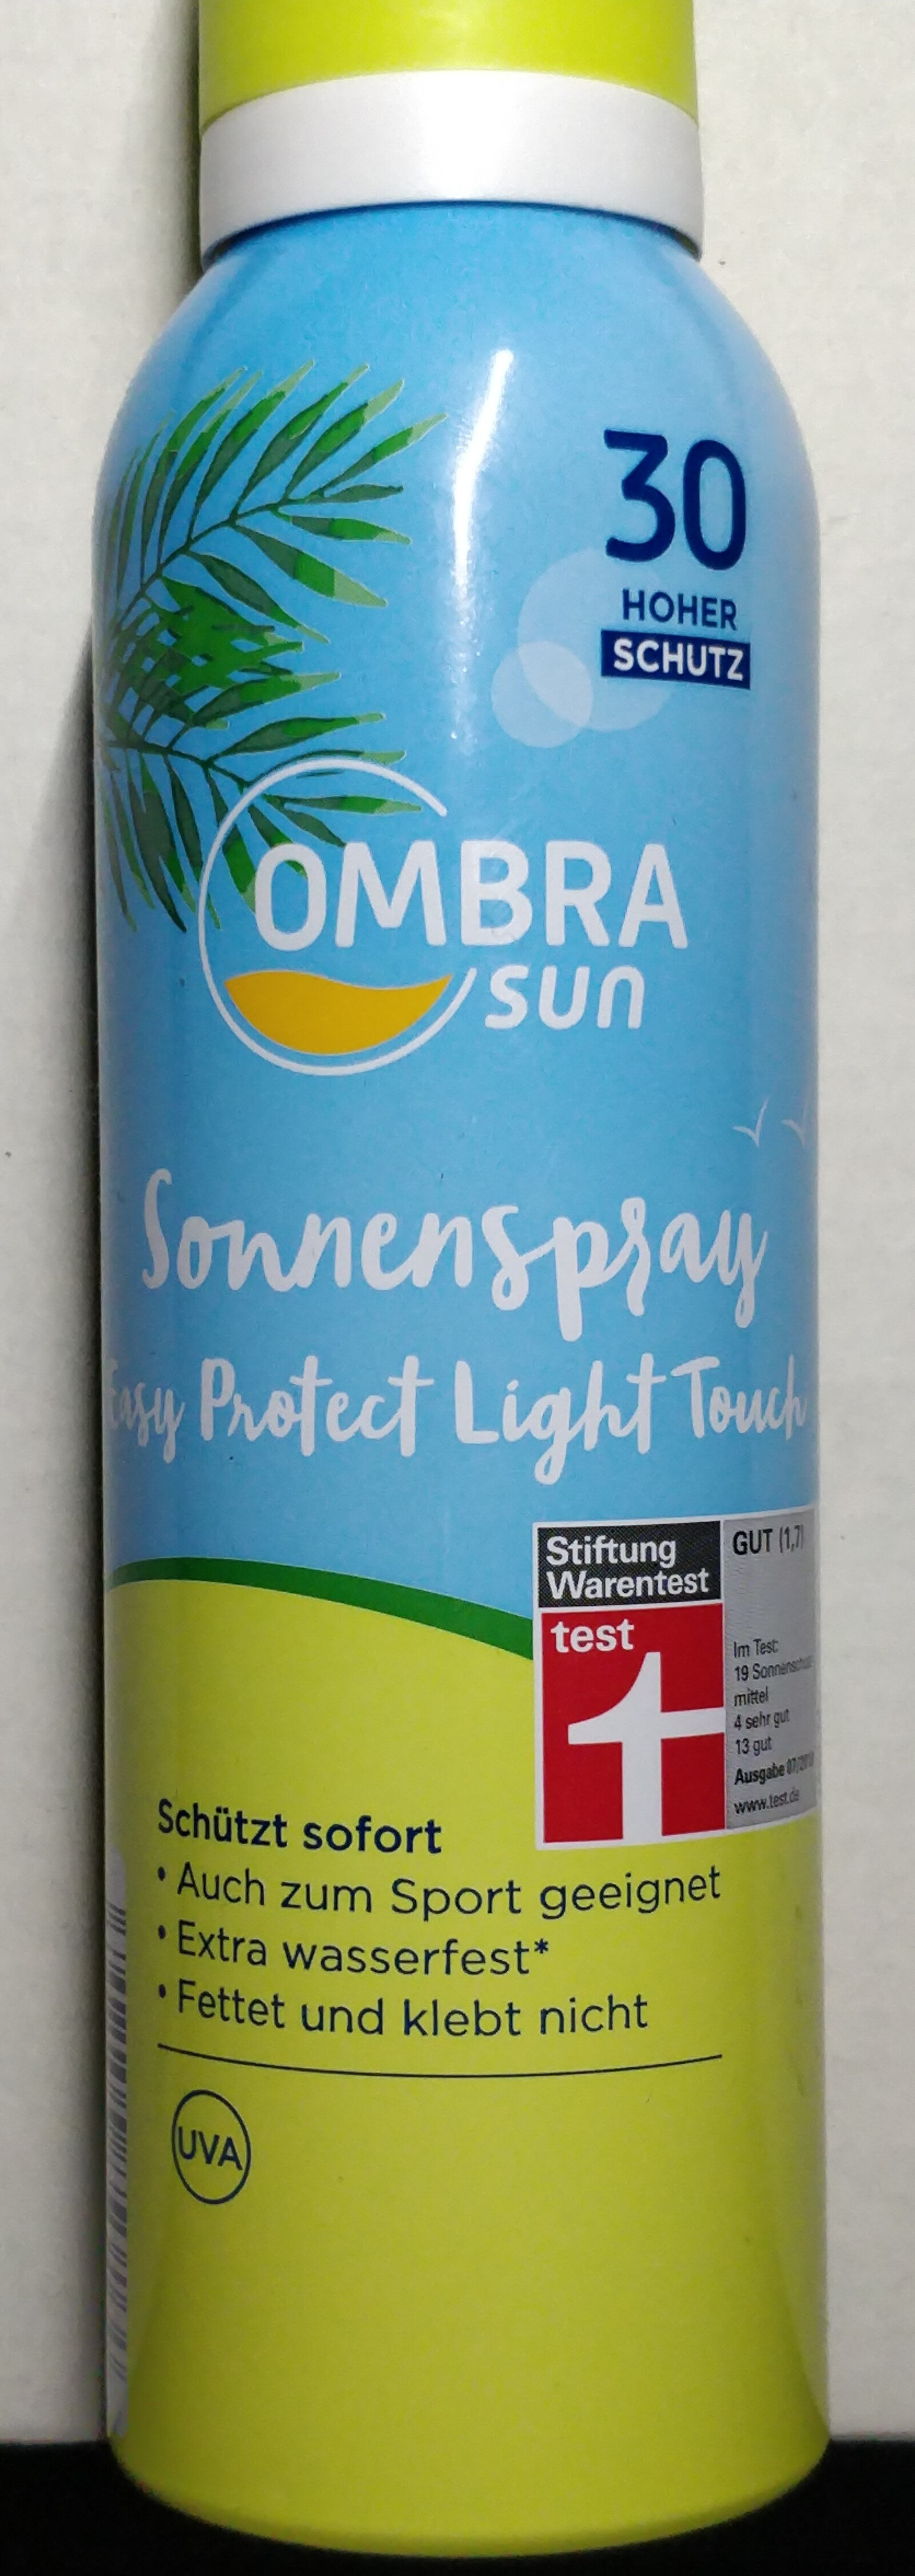 Sonnenspray Easy Protect Light Touch LSF 30 - Product - de